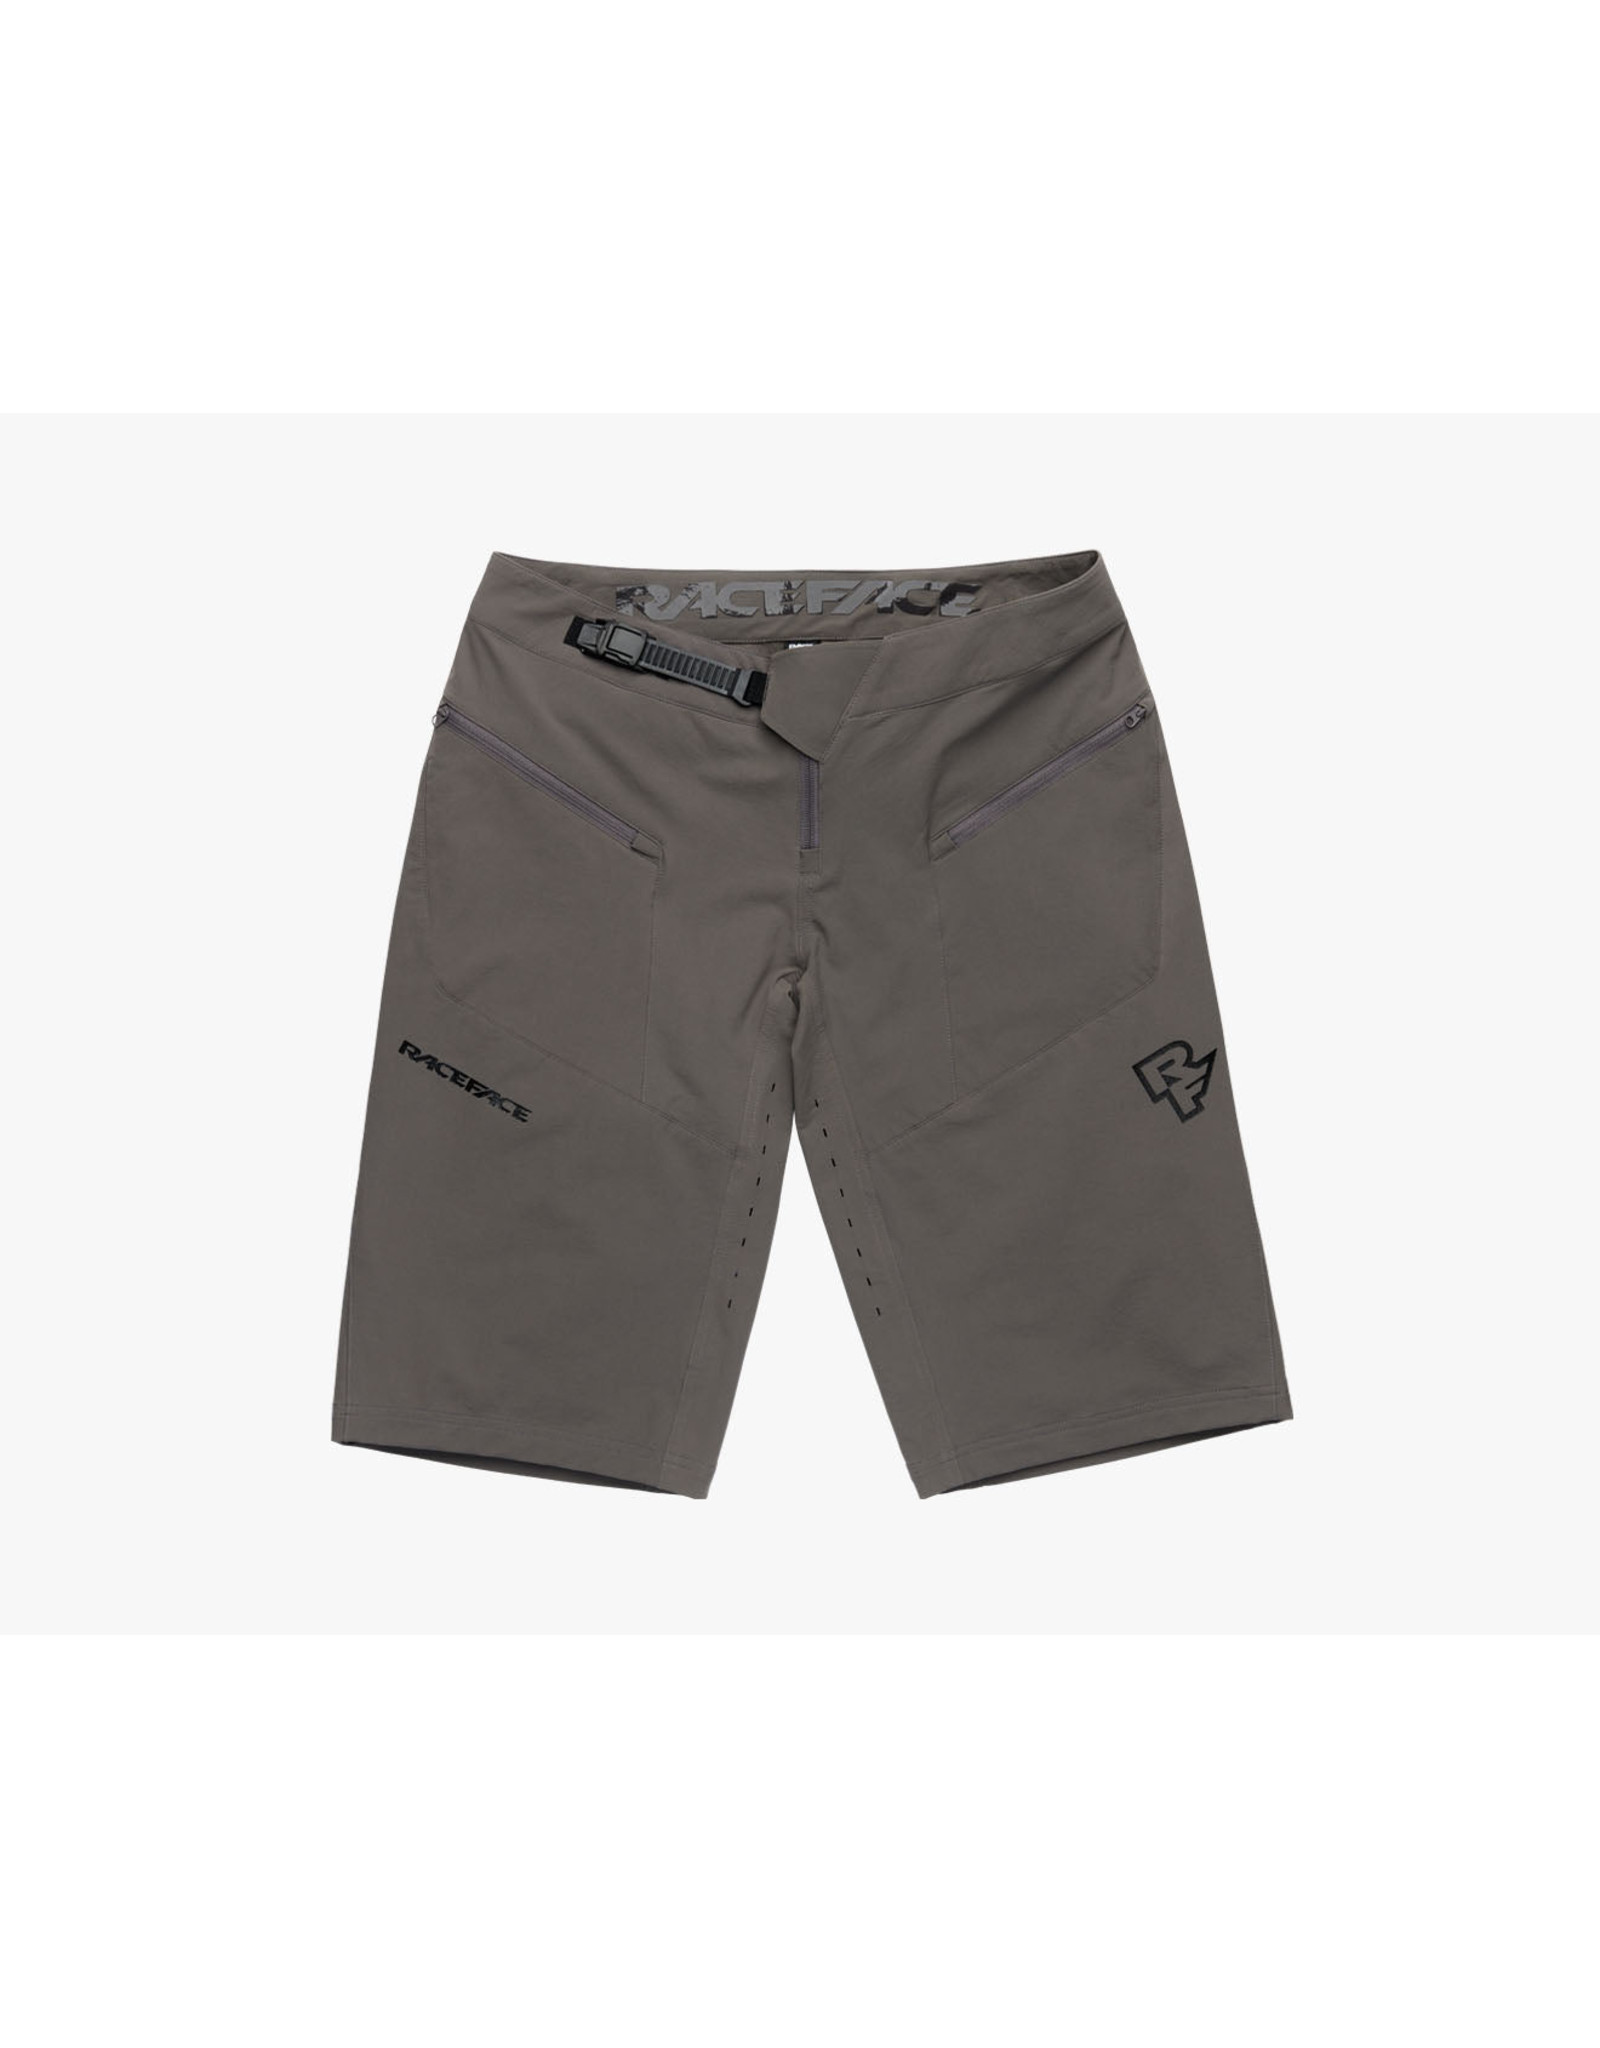 RACEFACE Mens Indy Shorts